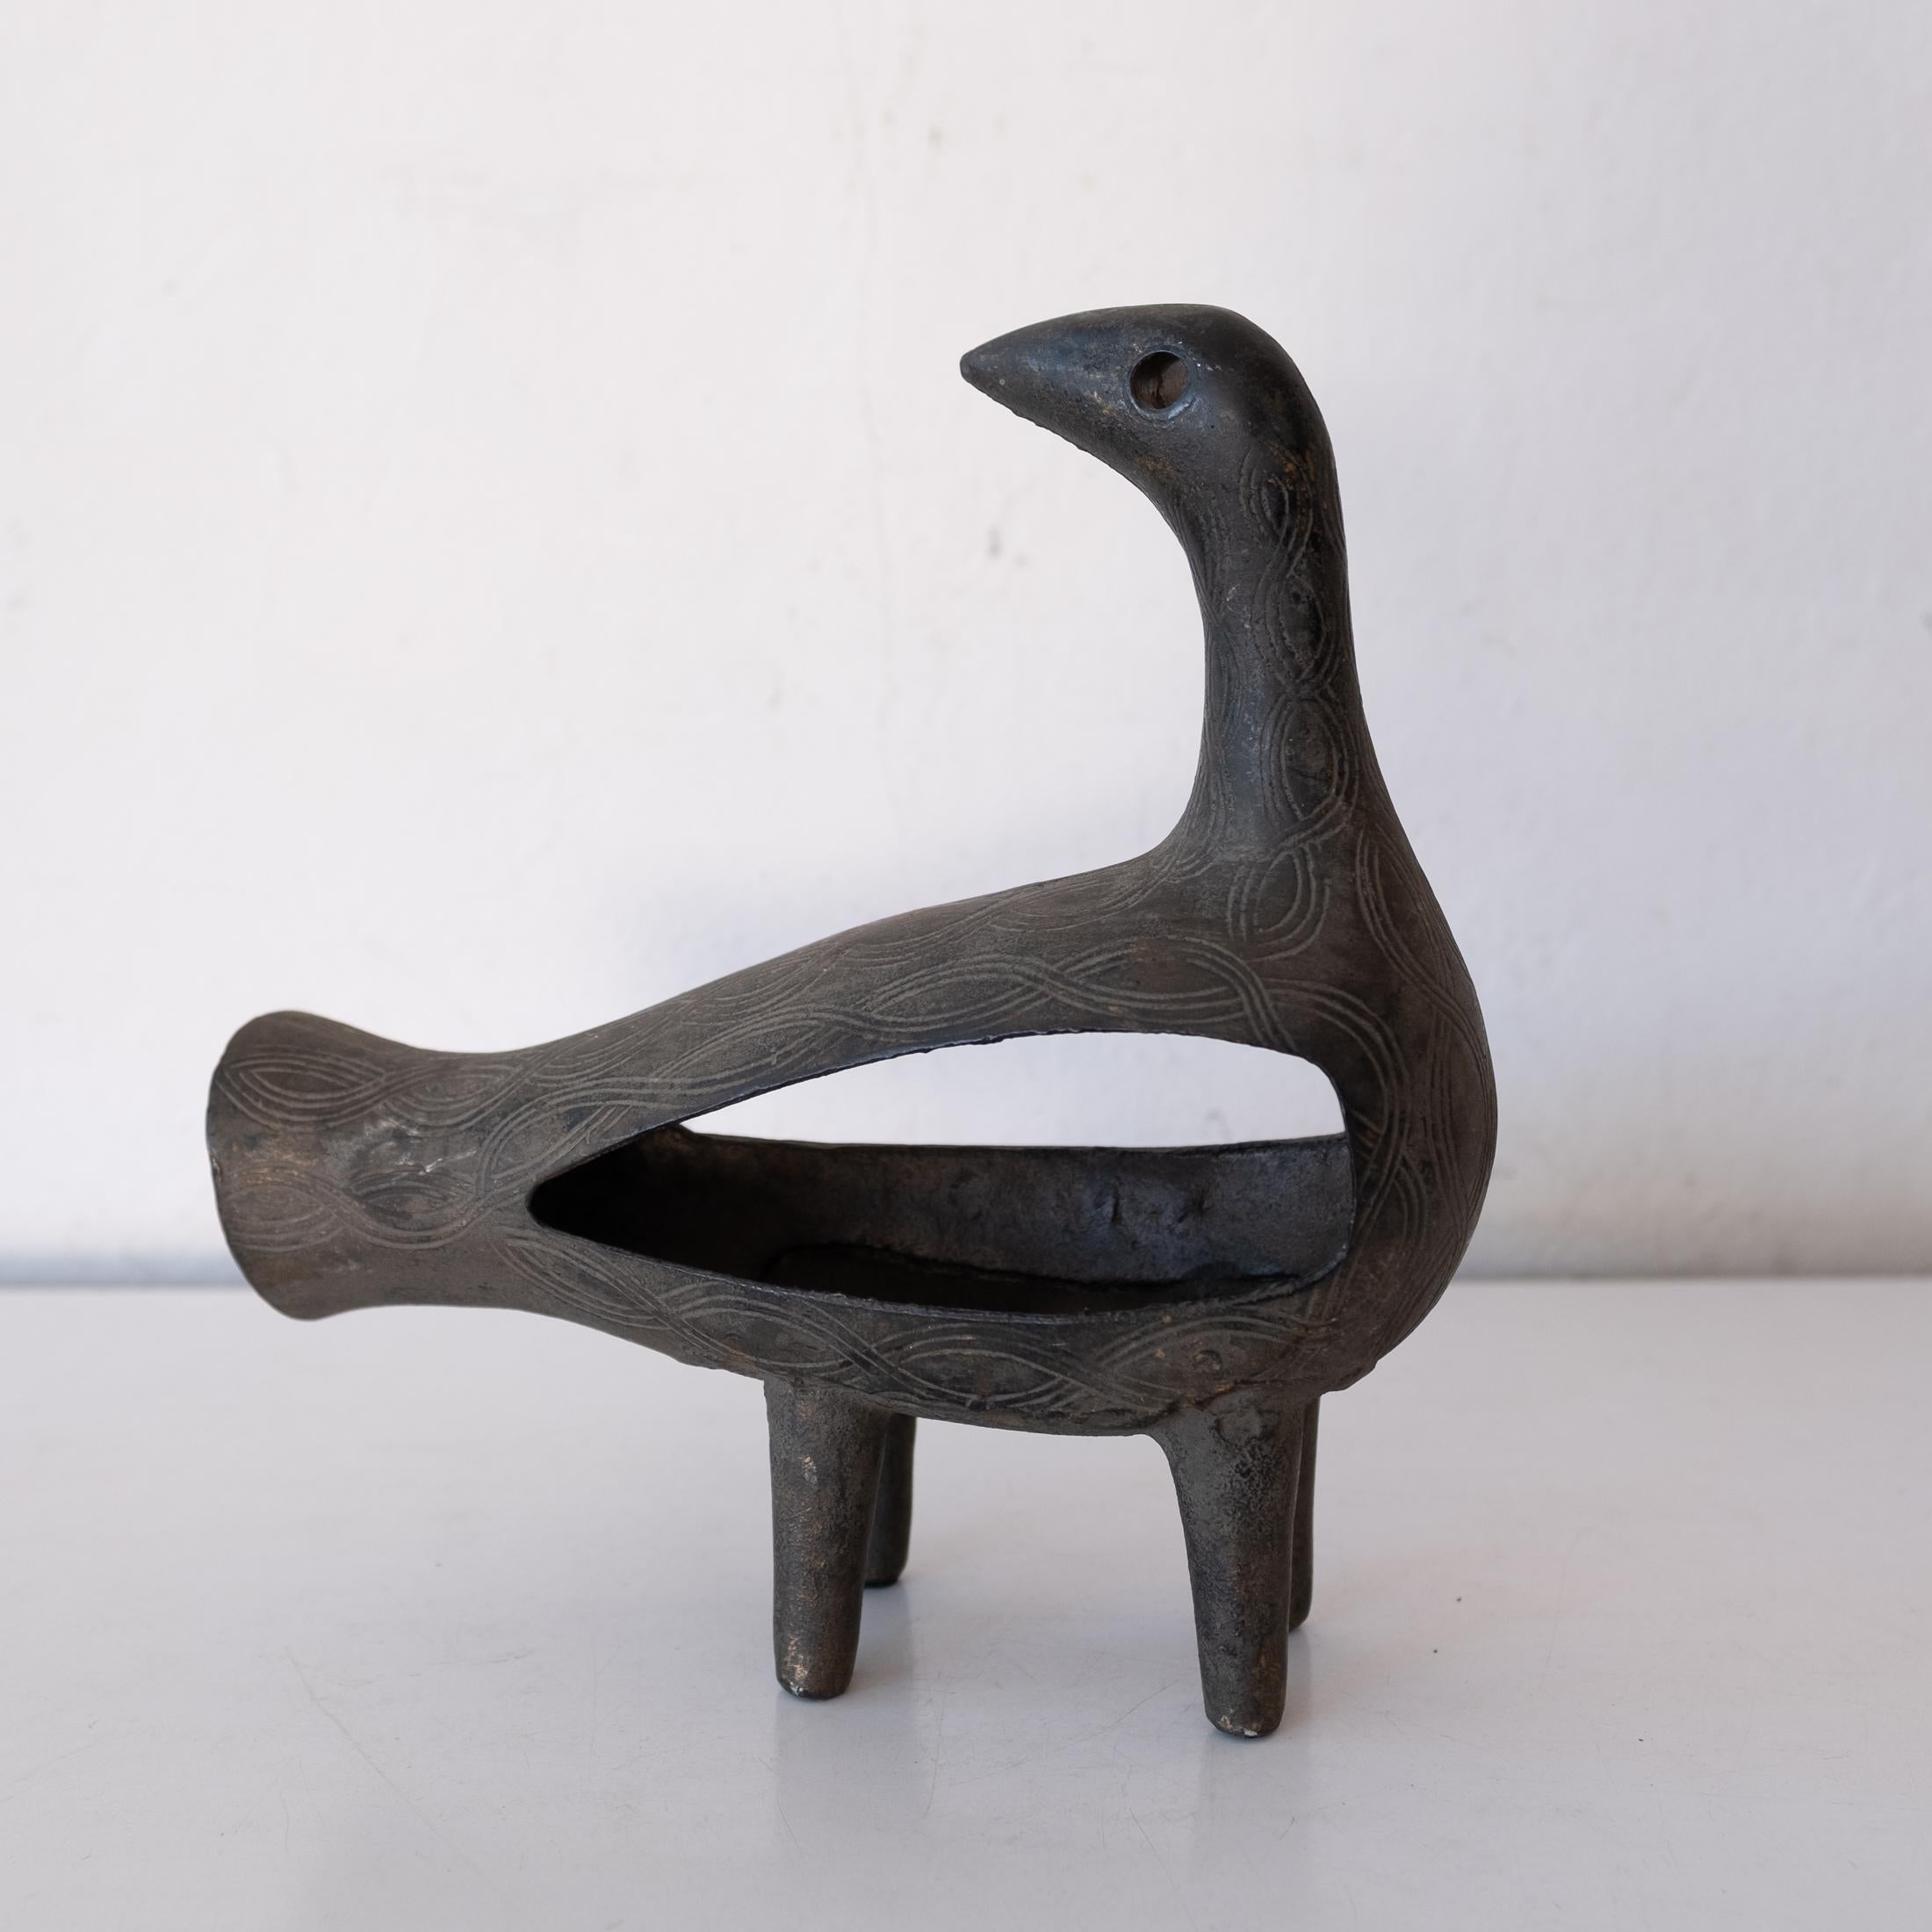 Stylized cast iron bird sculpture from Japan. Fantastic incised design. Could also be used as an incense burner. Nice patina throughout. Stamped JAPAN. 1950s